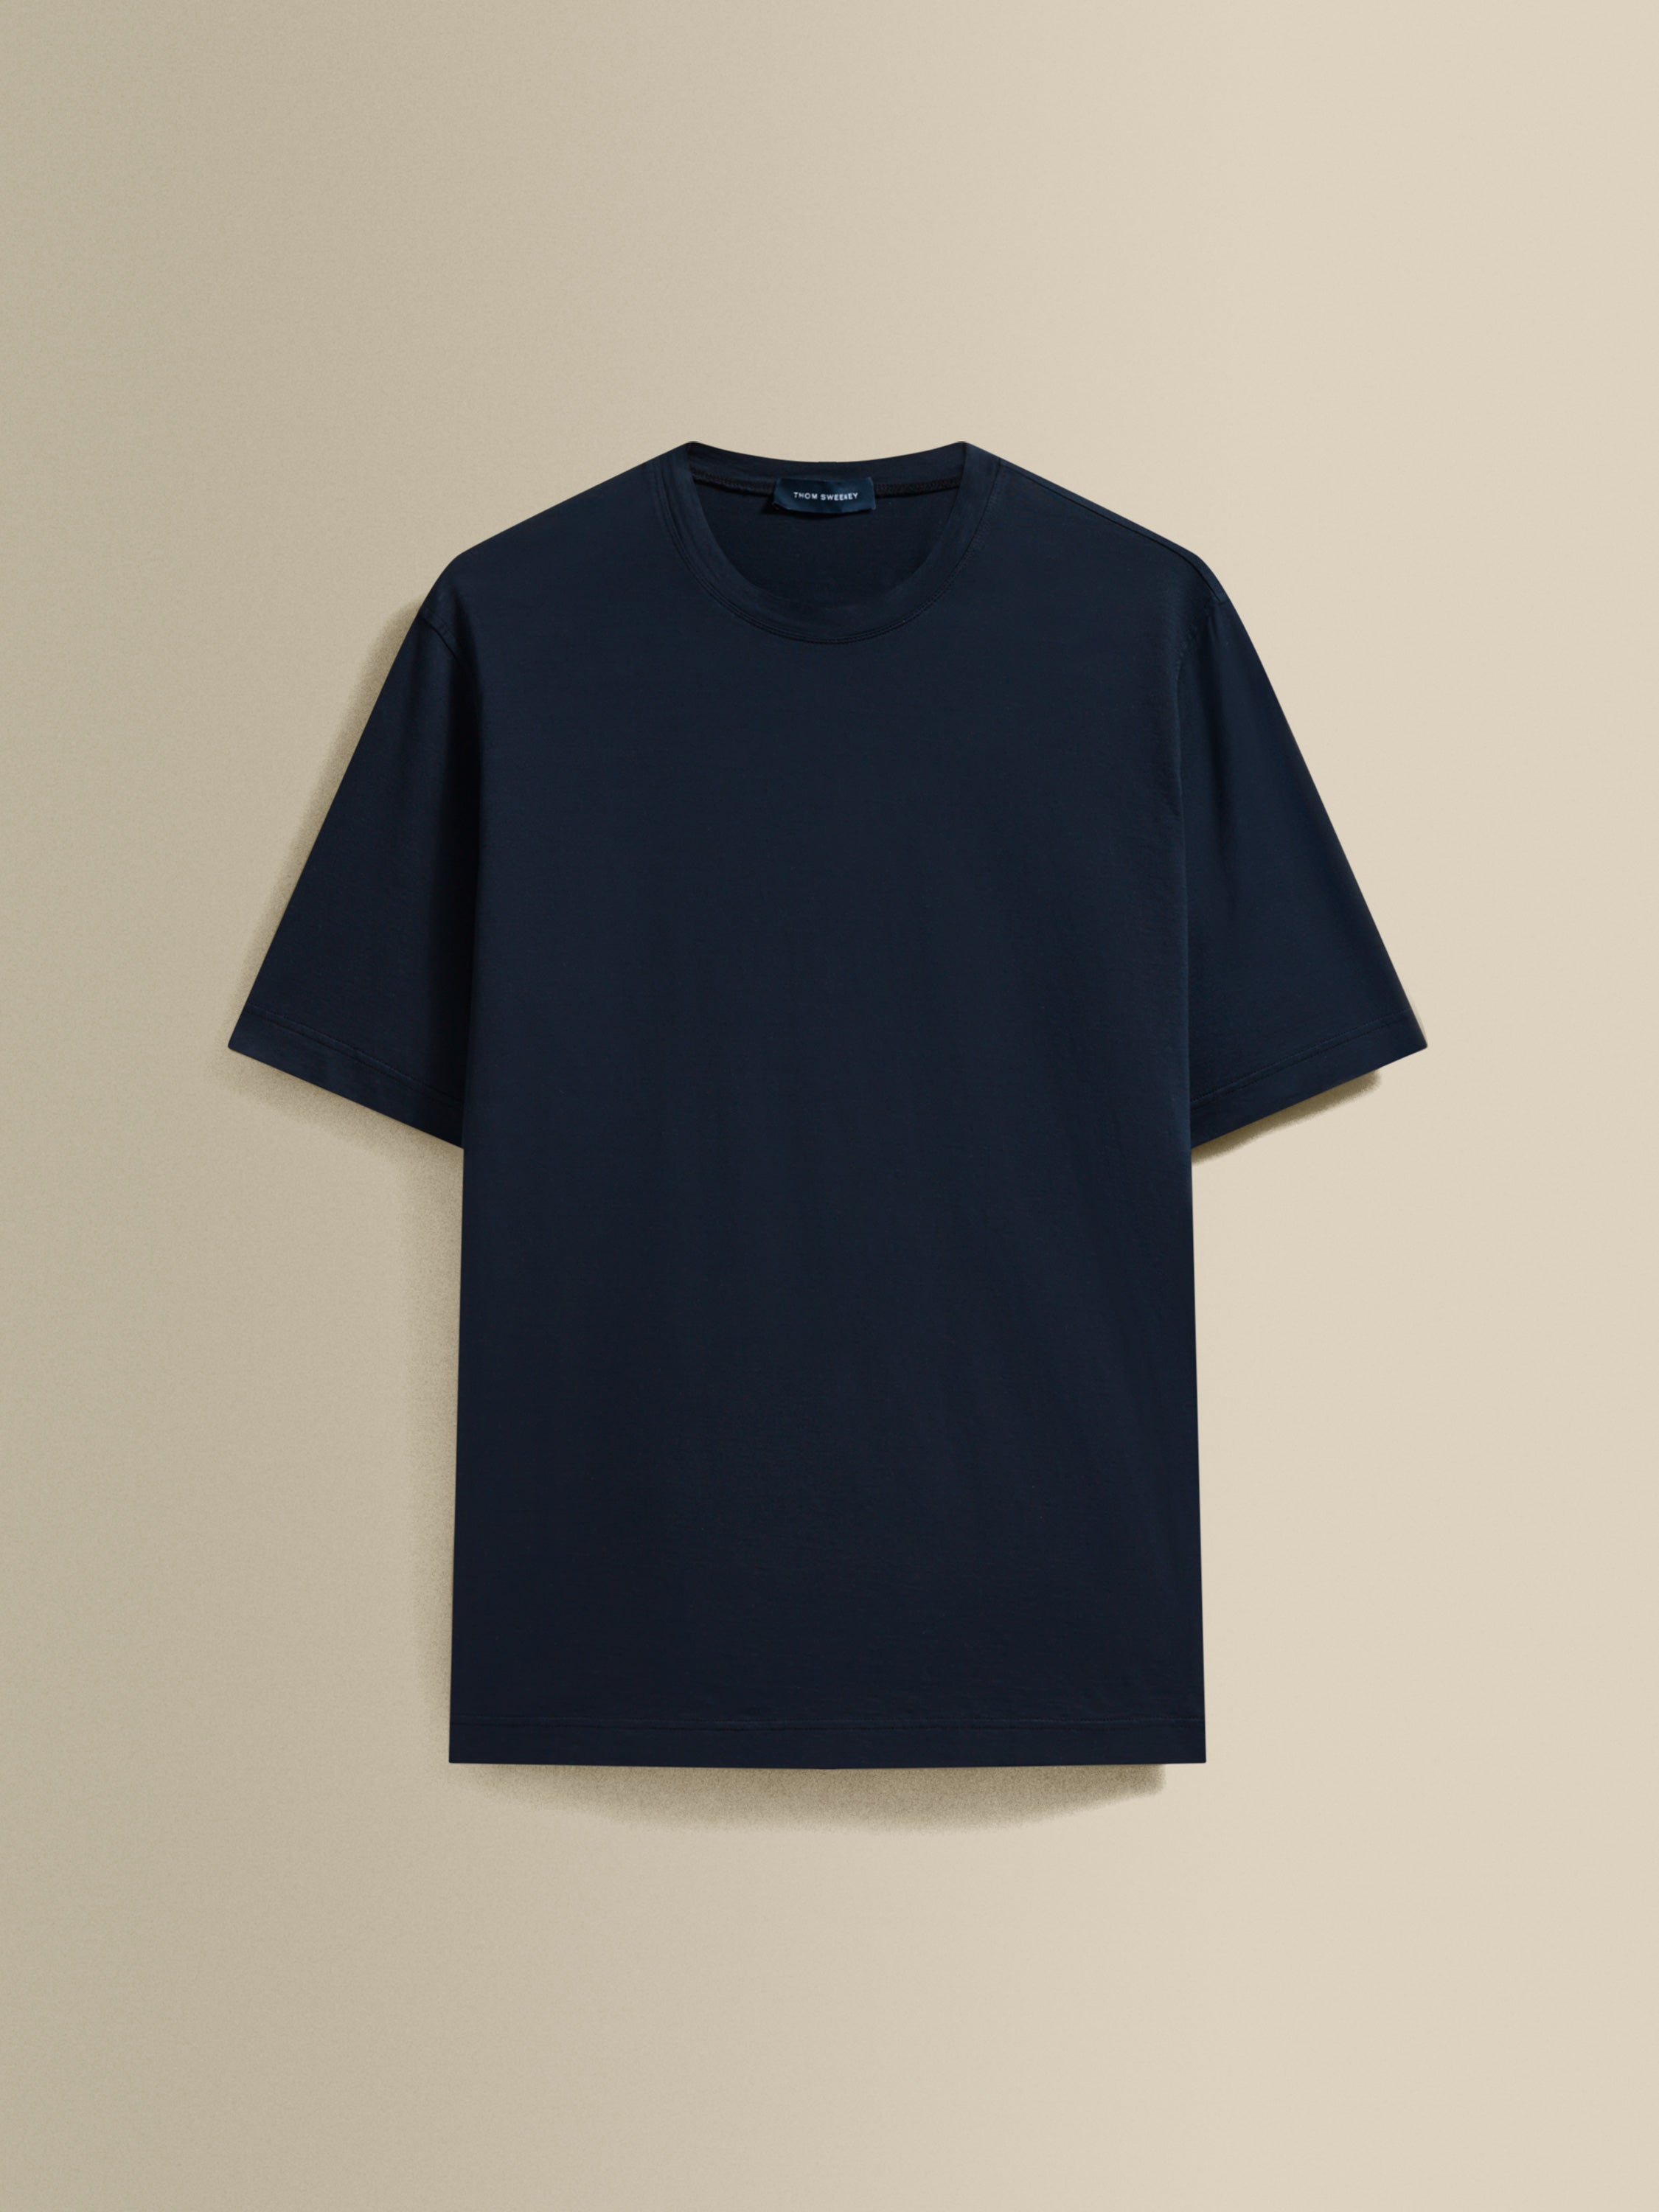 Lightweight Cotton Classic T-Shirt Navy Product Image